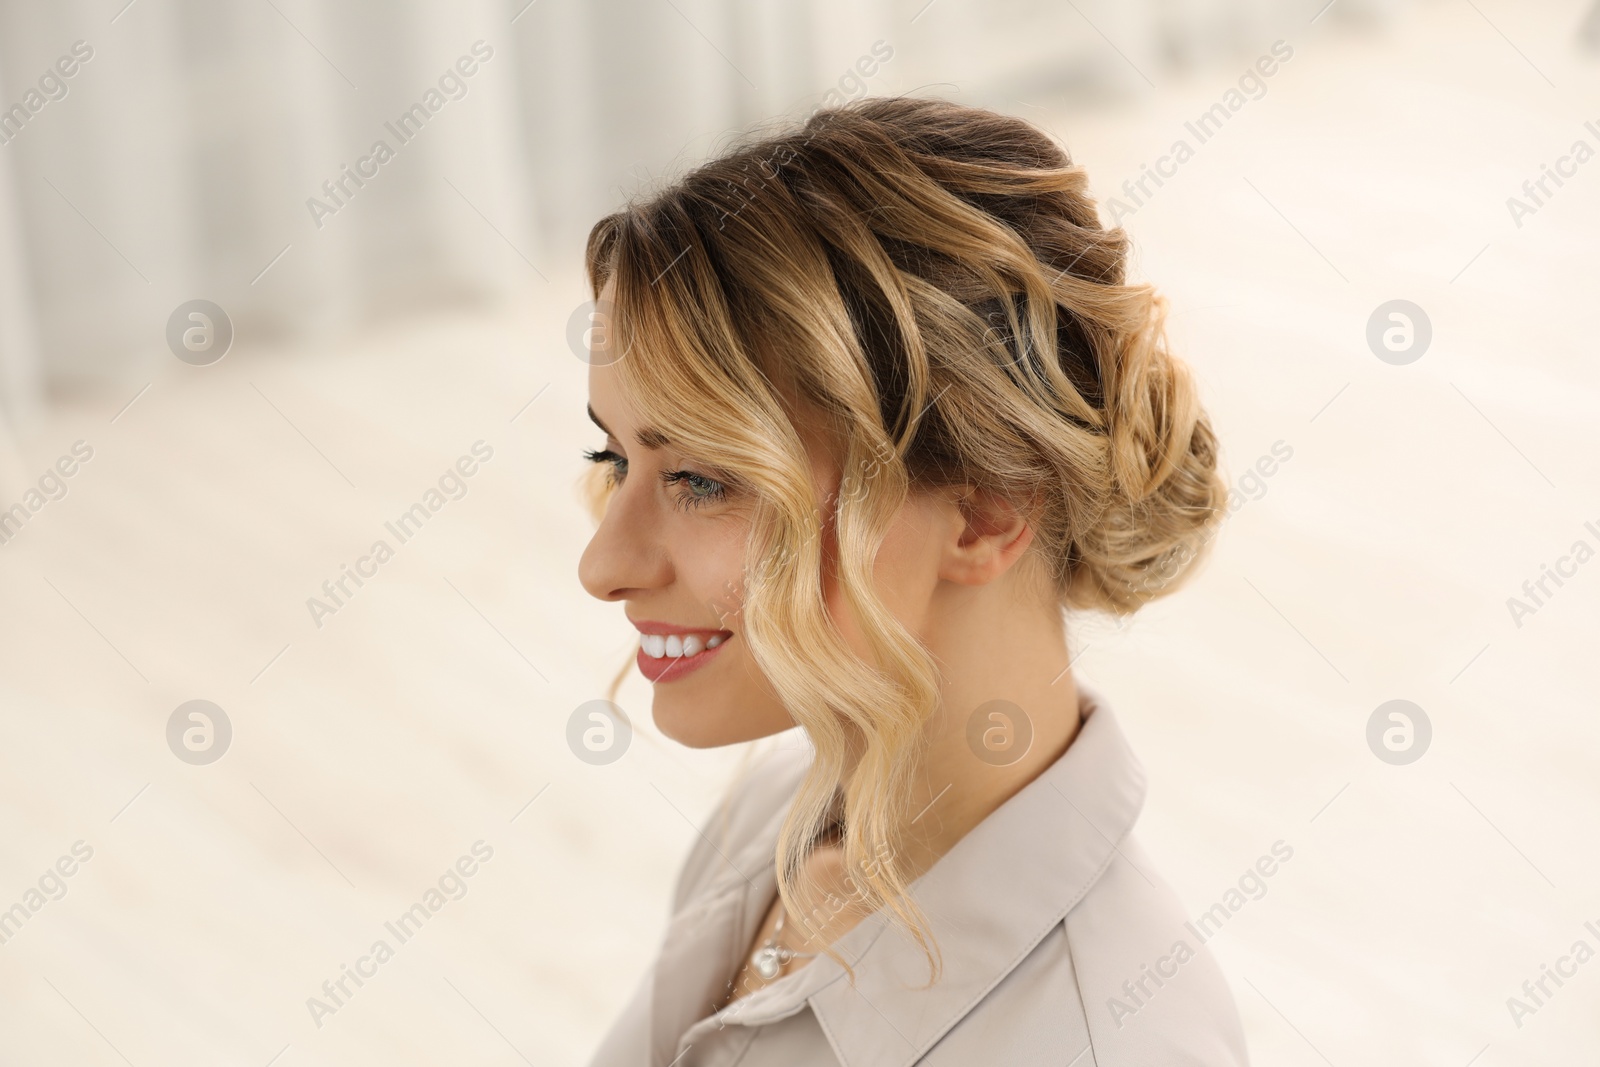 Photo of Smiling woman with beautiful hair style indoors